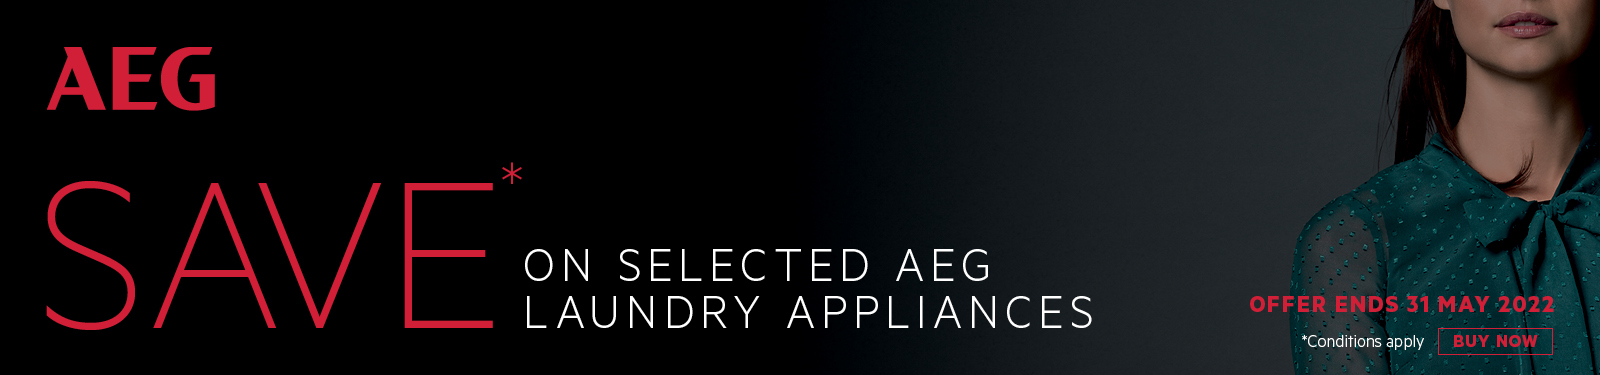 Save on selected AEG Laundry Appliances